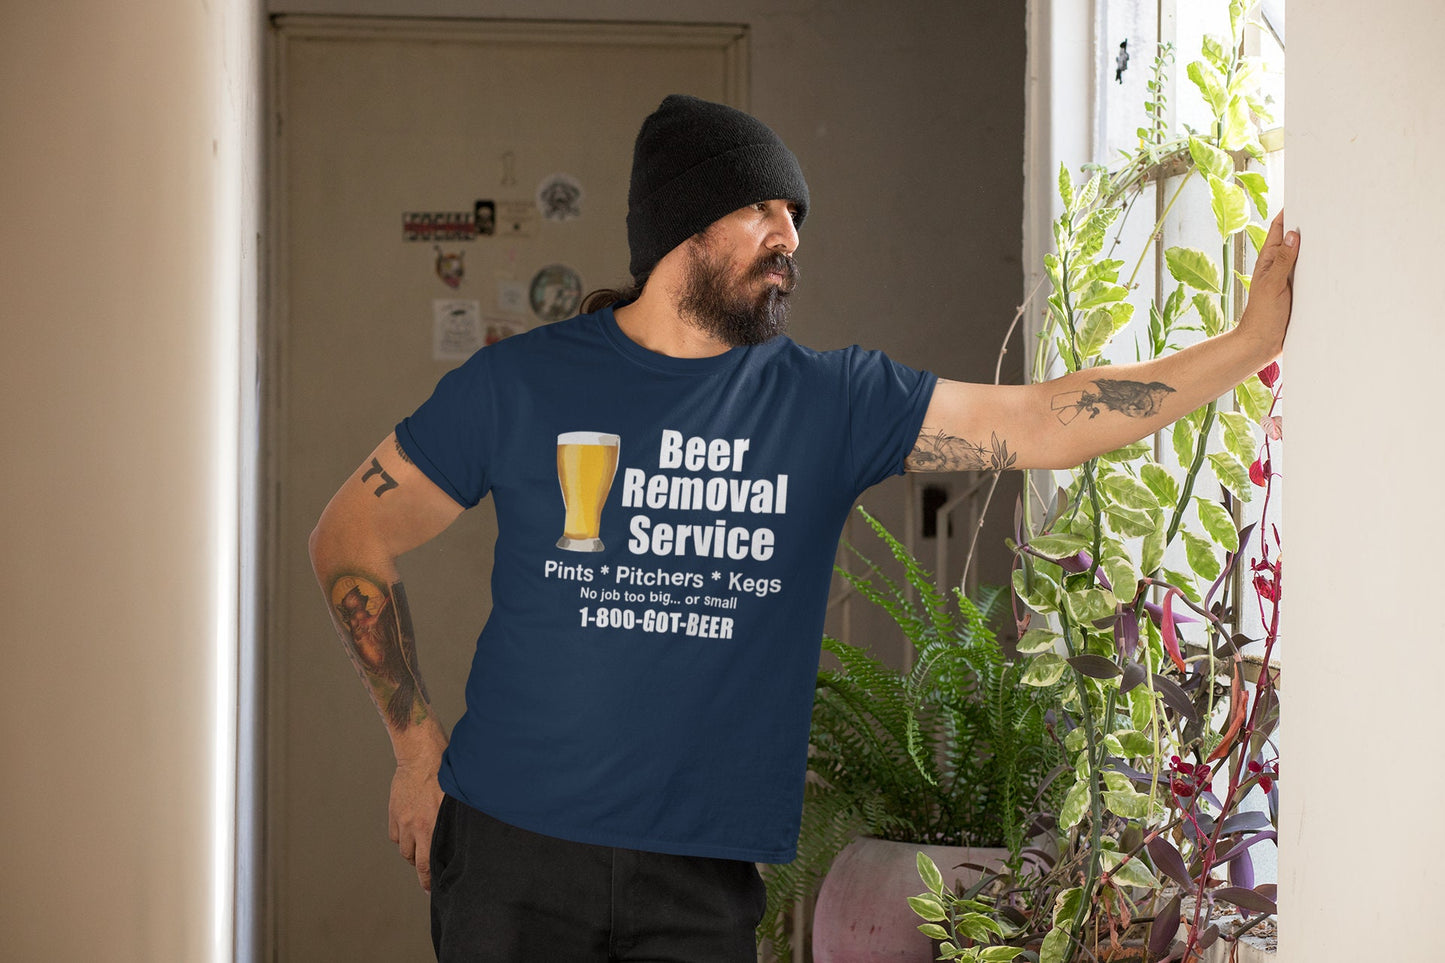 Mens Beer Removal Service Jersey Short Sleeve Tee